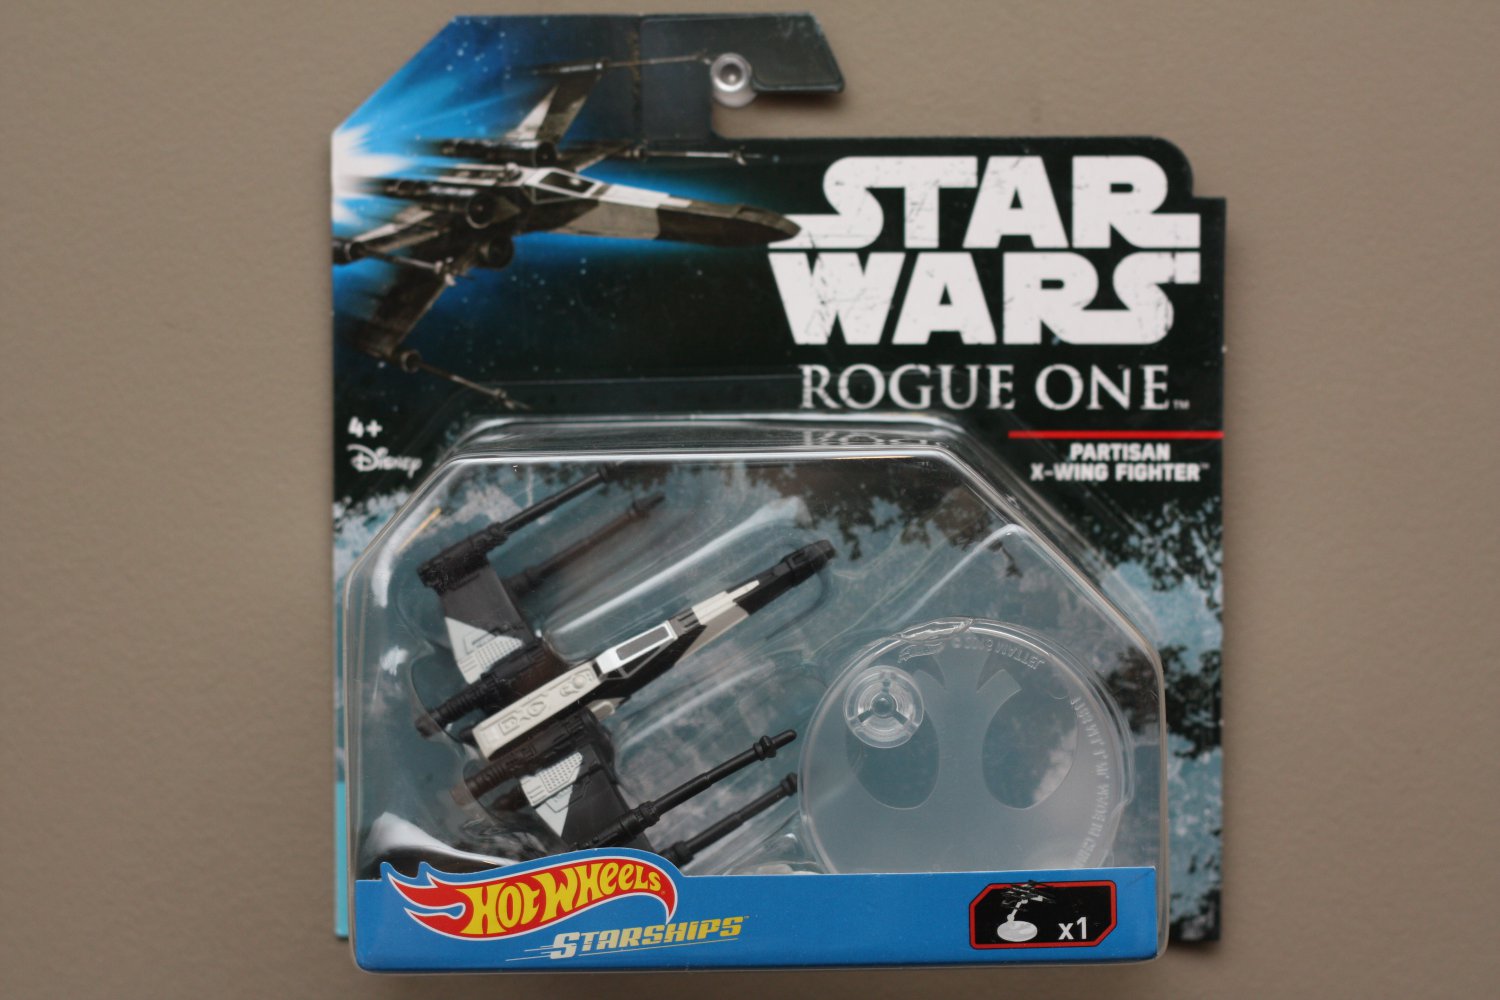 Hot Wheels 2017 Star Wars Ships Partisan X-Wing Fighter (Rogue One)